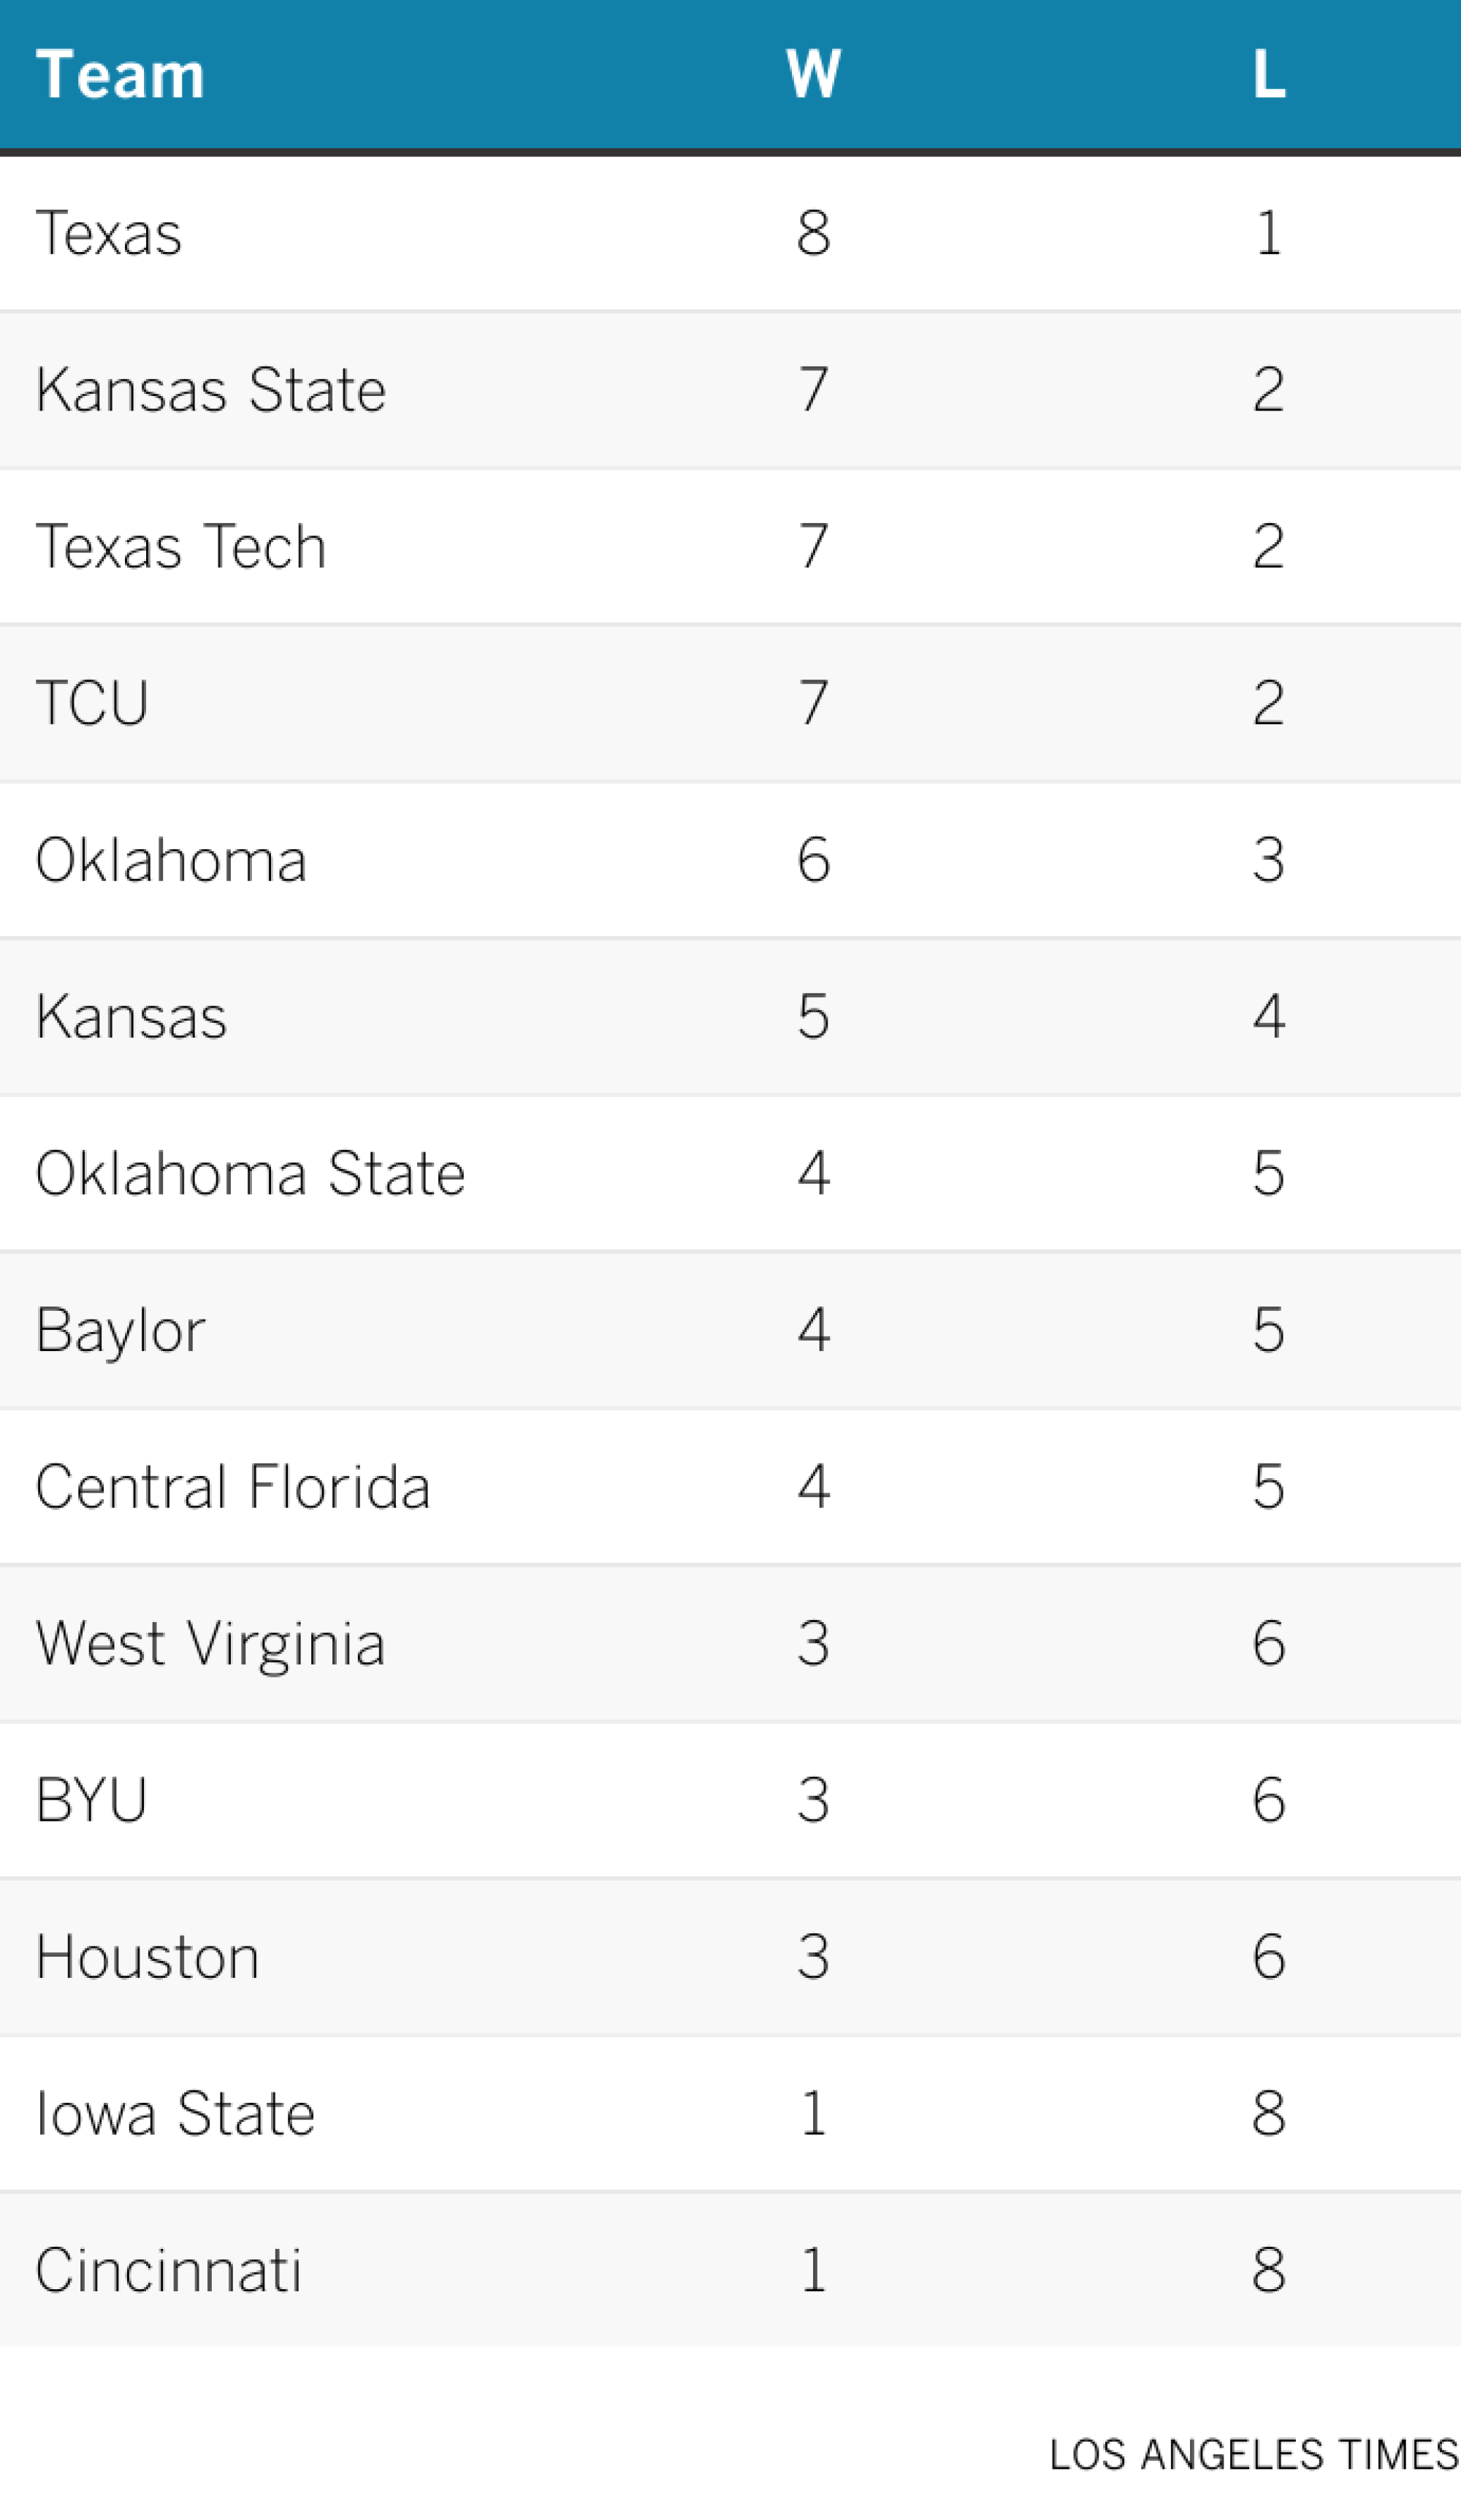 Ranking of the Big 12